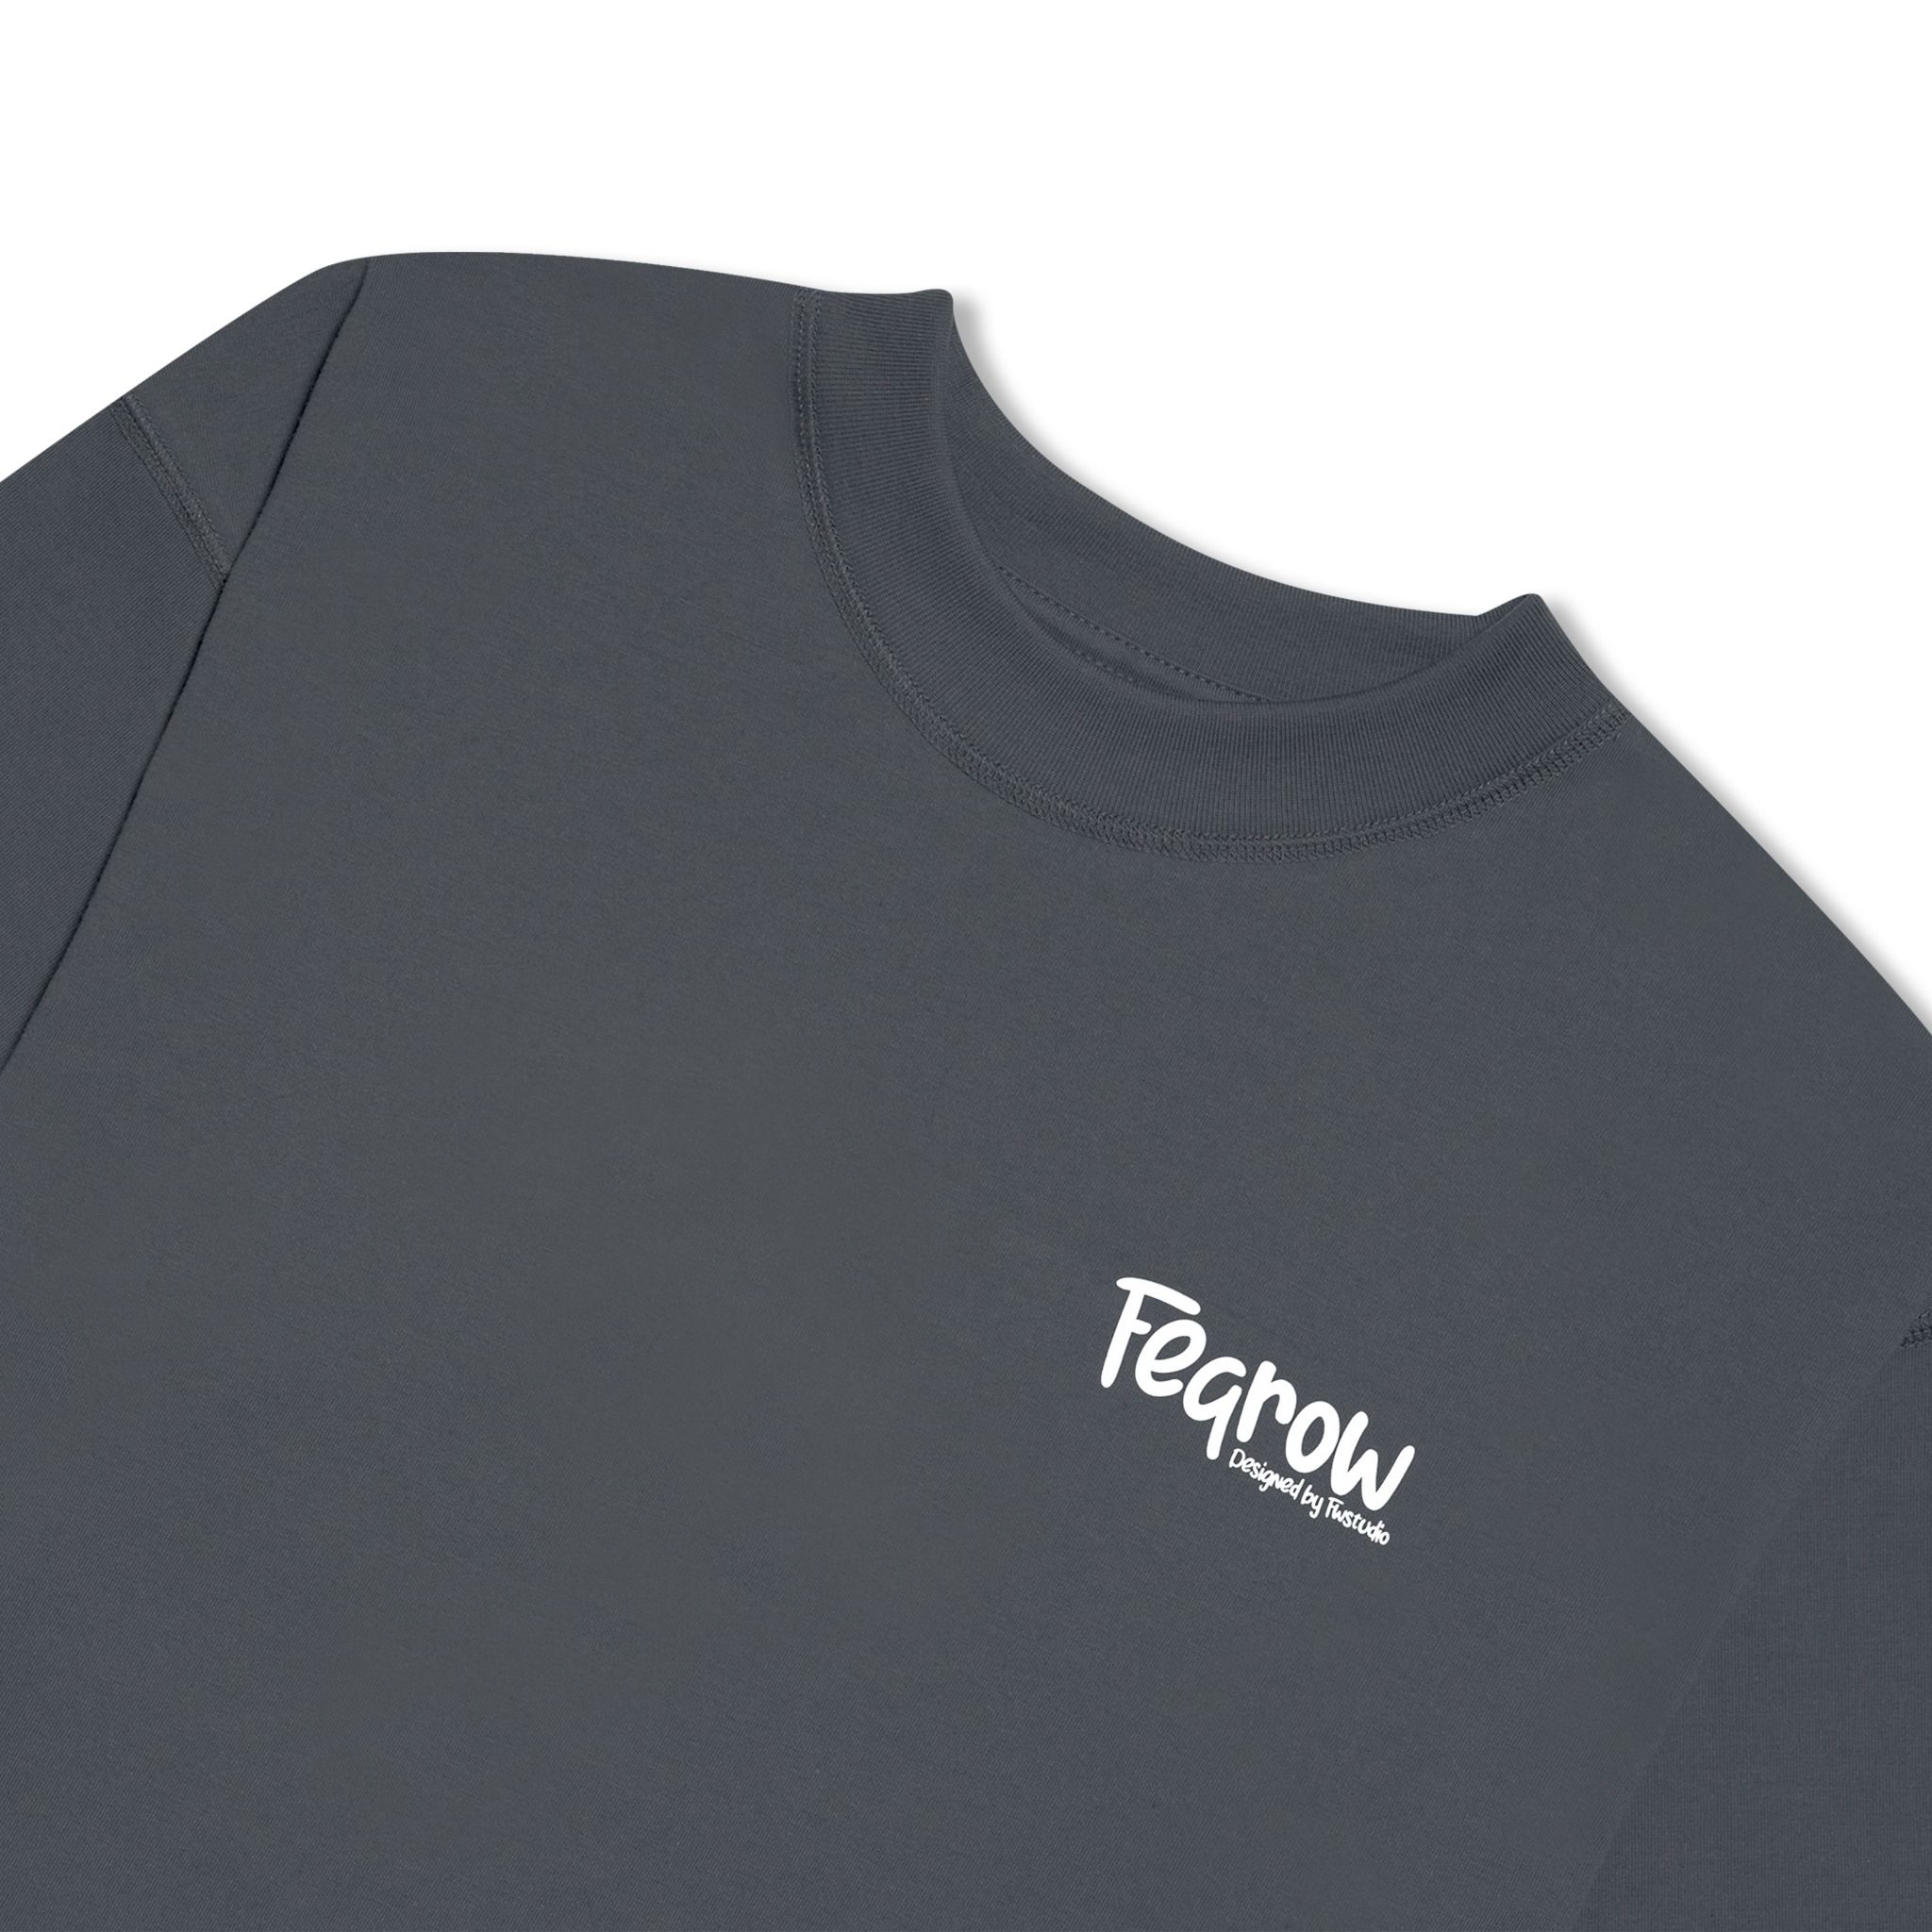  Fearow Double Tee Collection - Donut / Gray Pinstripe 